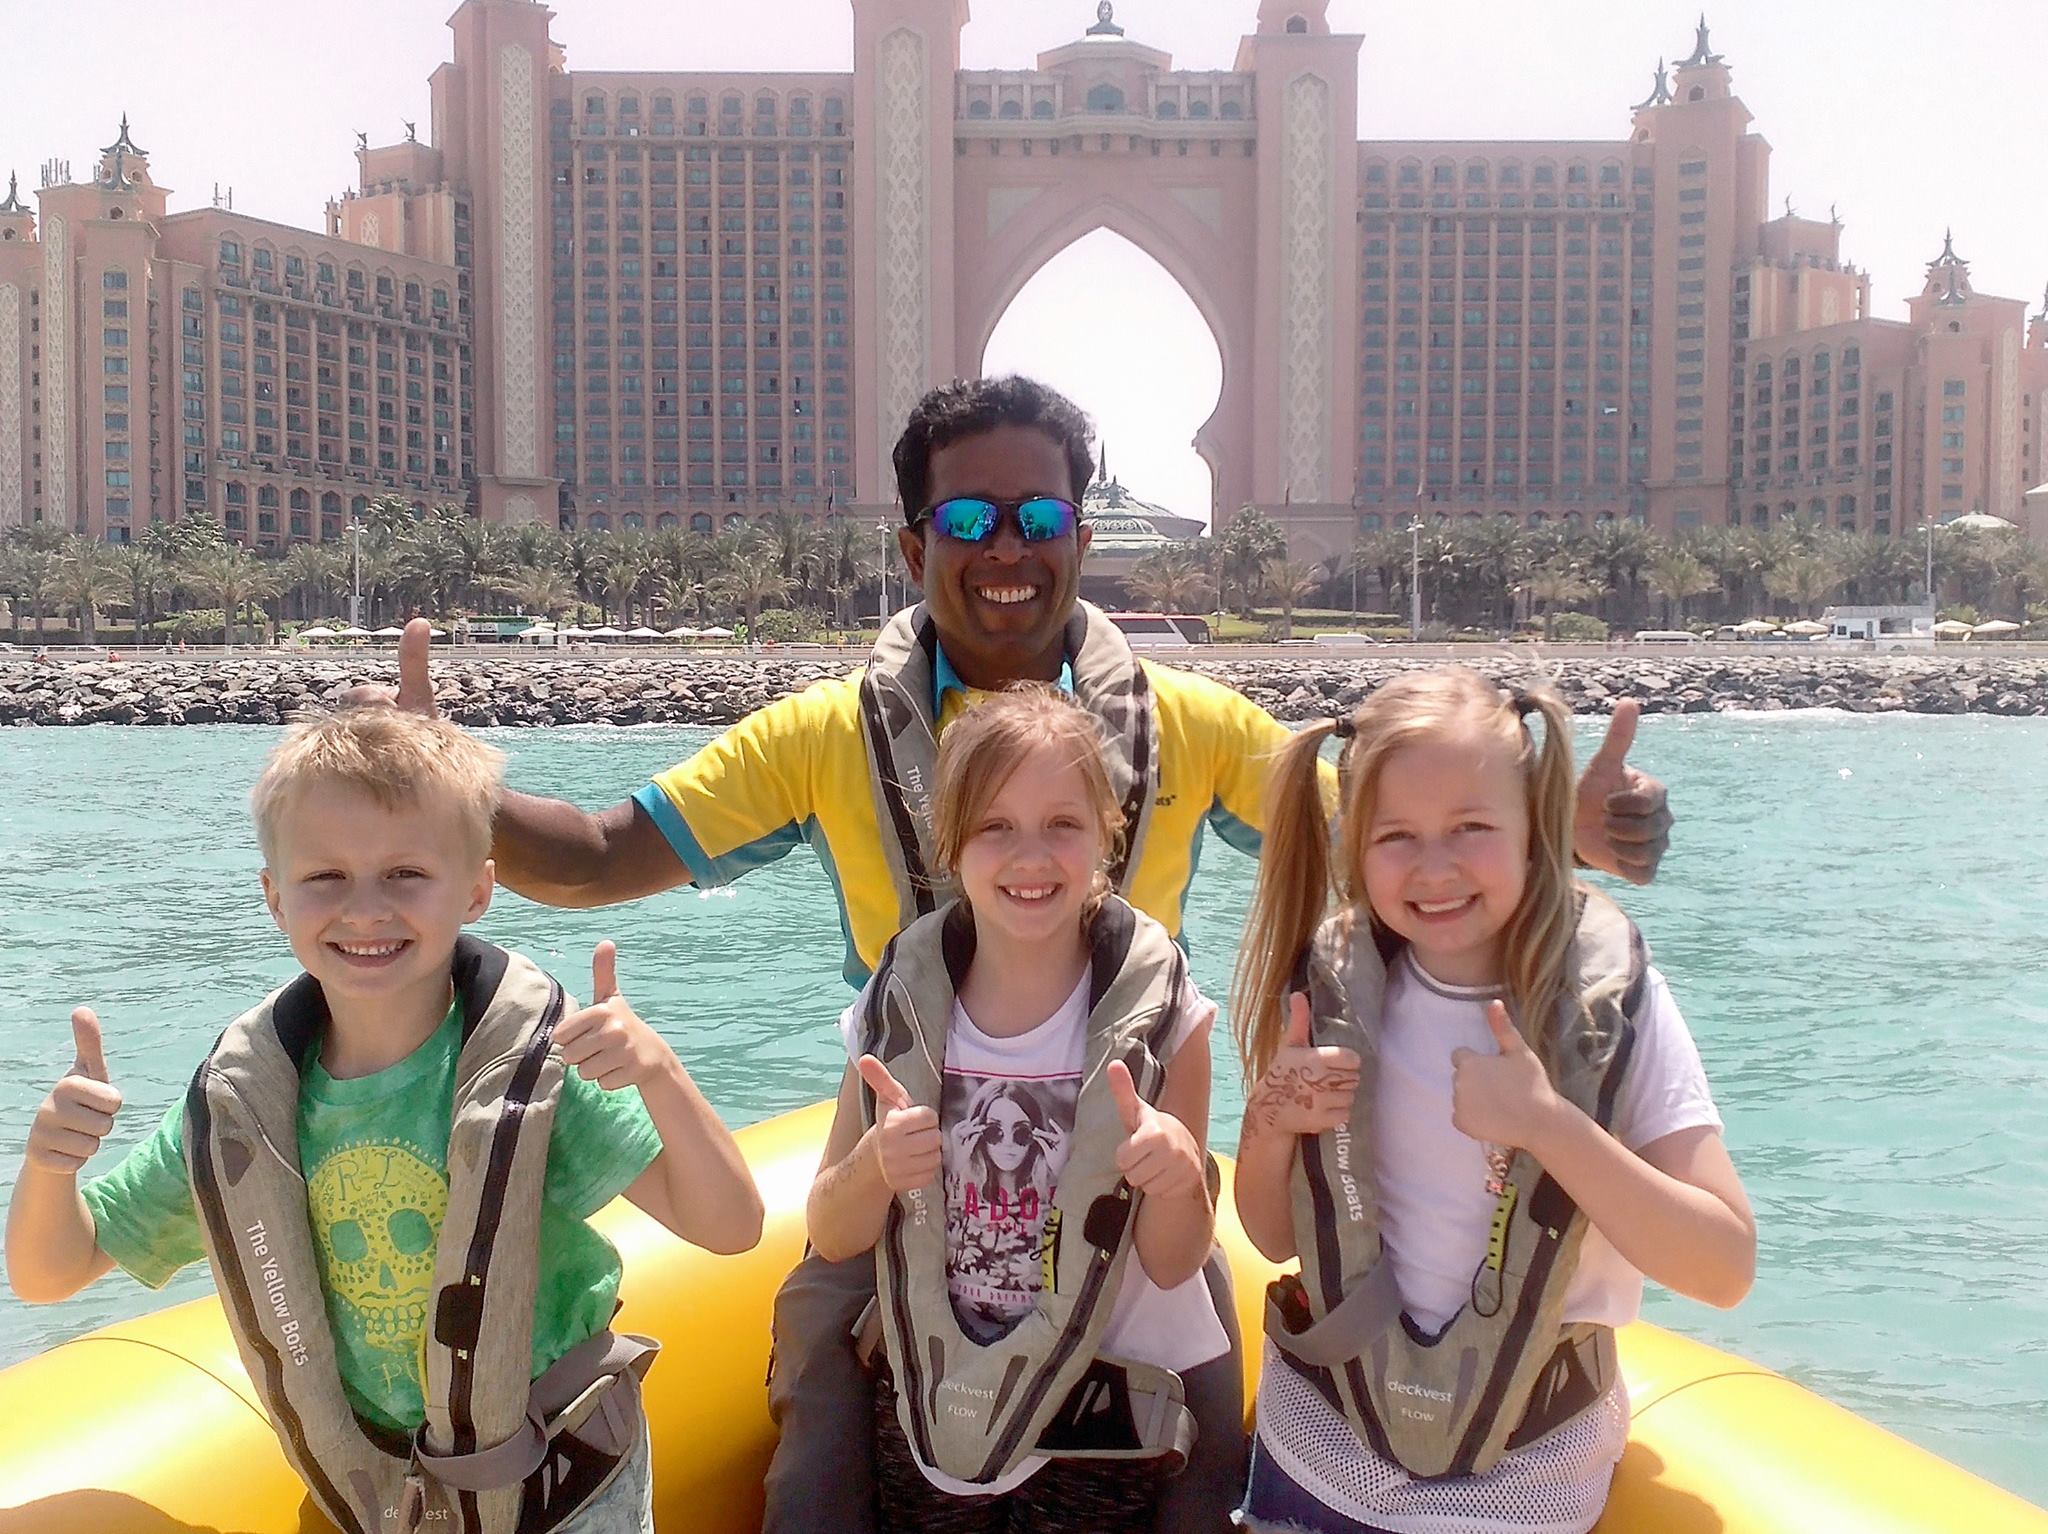 Ultimate Water Sports Dubai Package